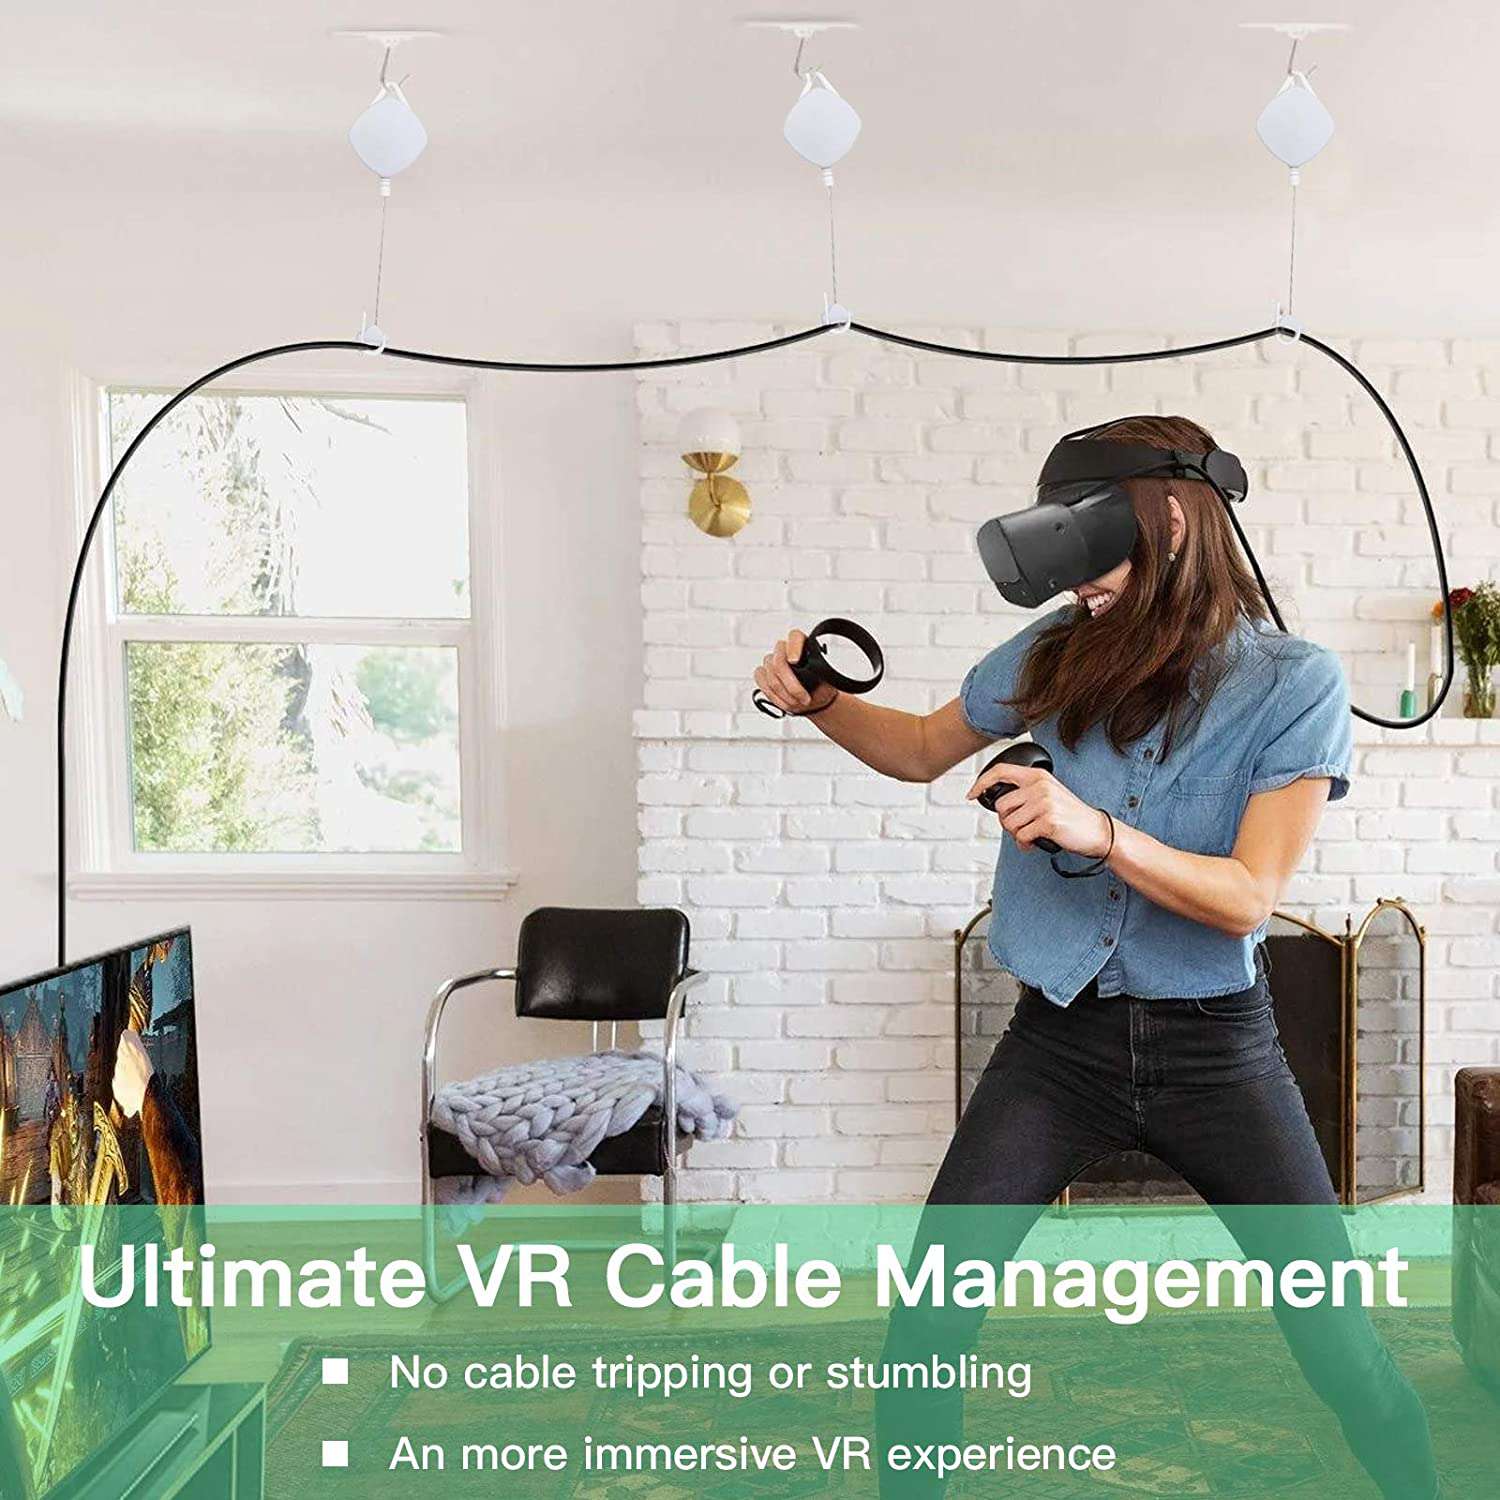 A person is using the VR Cable Management System while playing VR games.